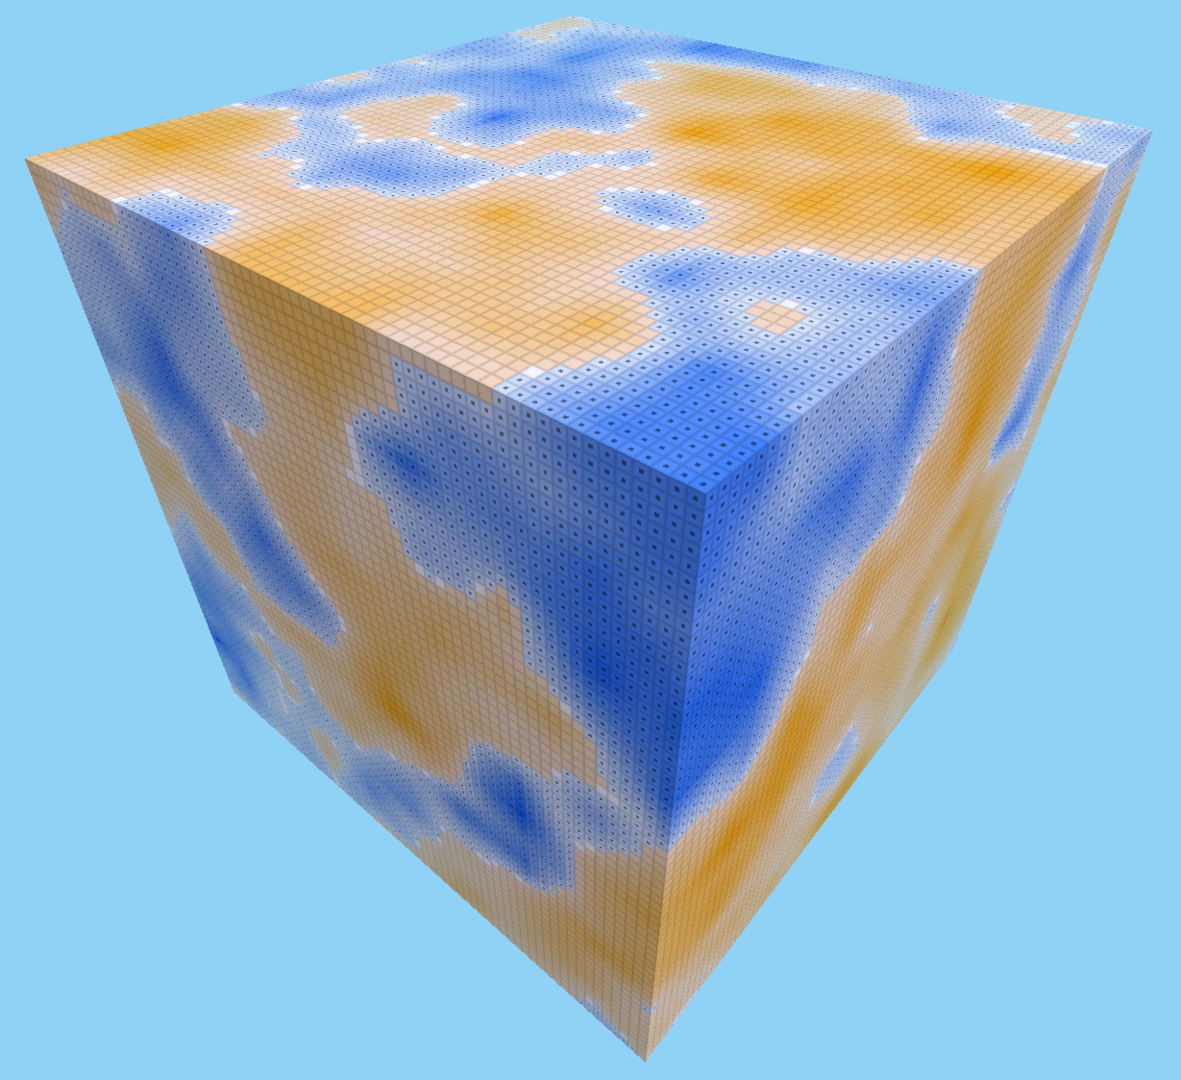 Cube generated with 3D Perlin noise